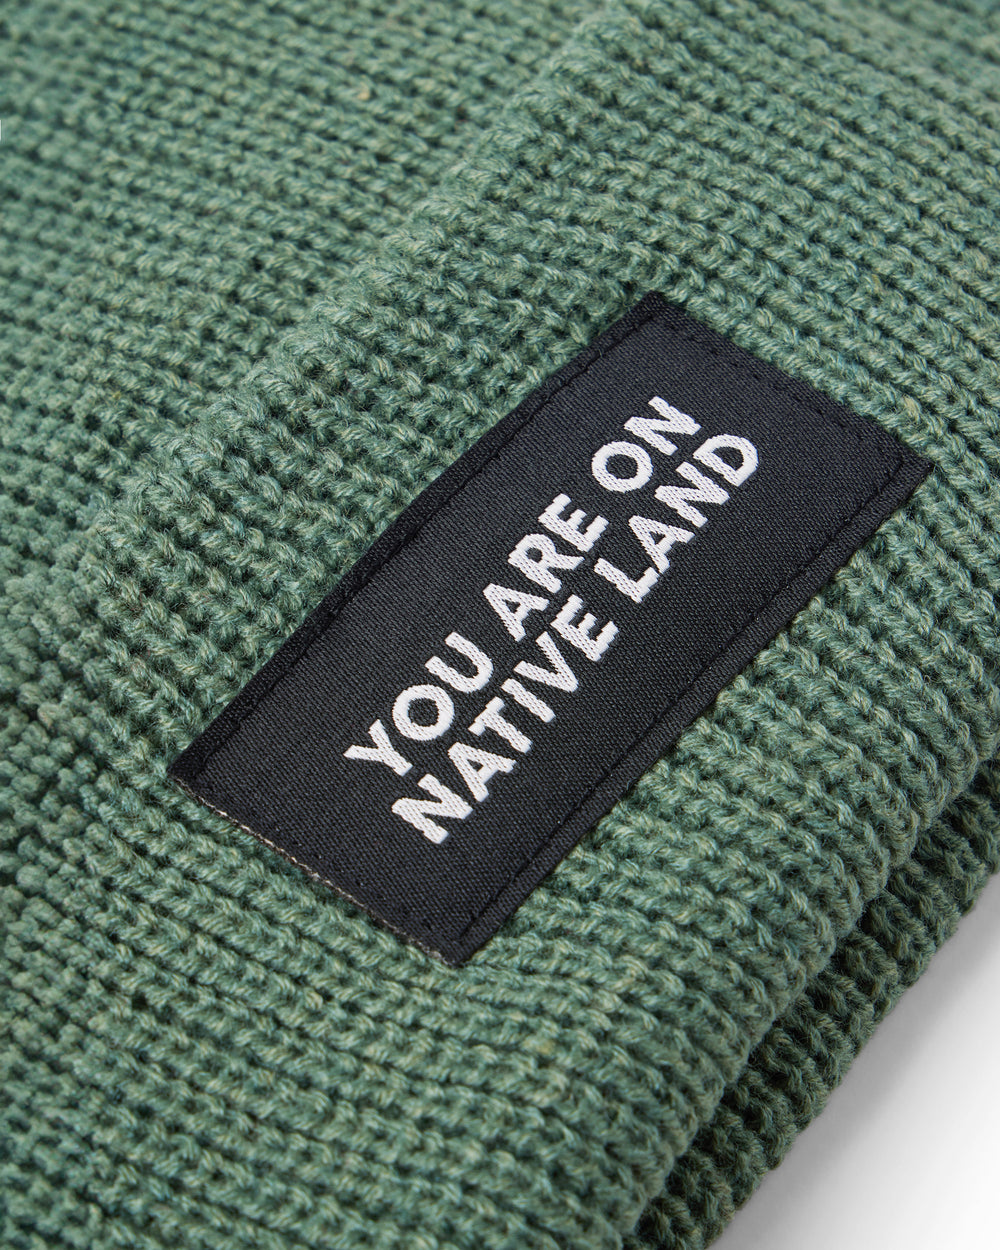 'YOU ARE ON NATIVE LAND' RIBBED BEANIE - JADE